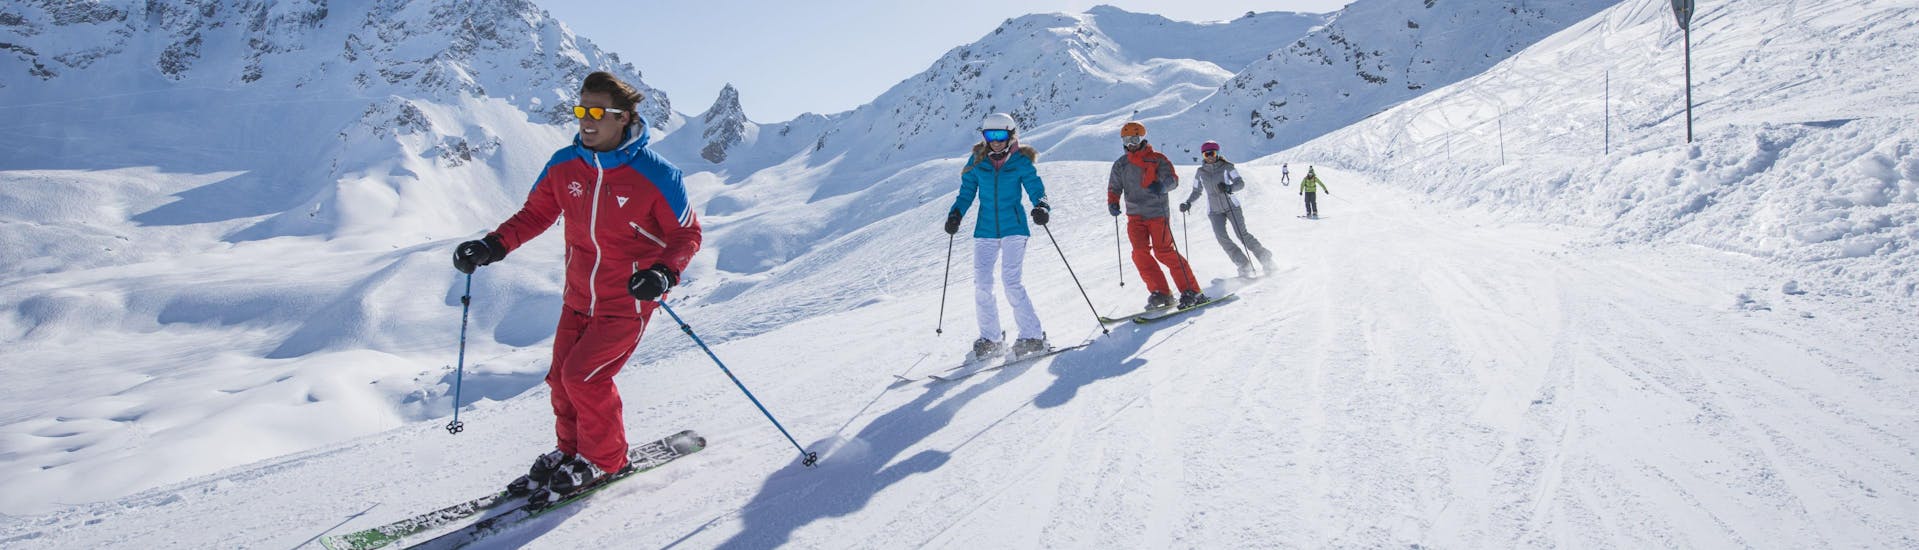 A group of skiers enjoy a day out in the slopes of the Courchevel 1550 ski resort where ski schools offers their ski lessons.